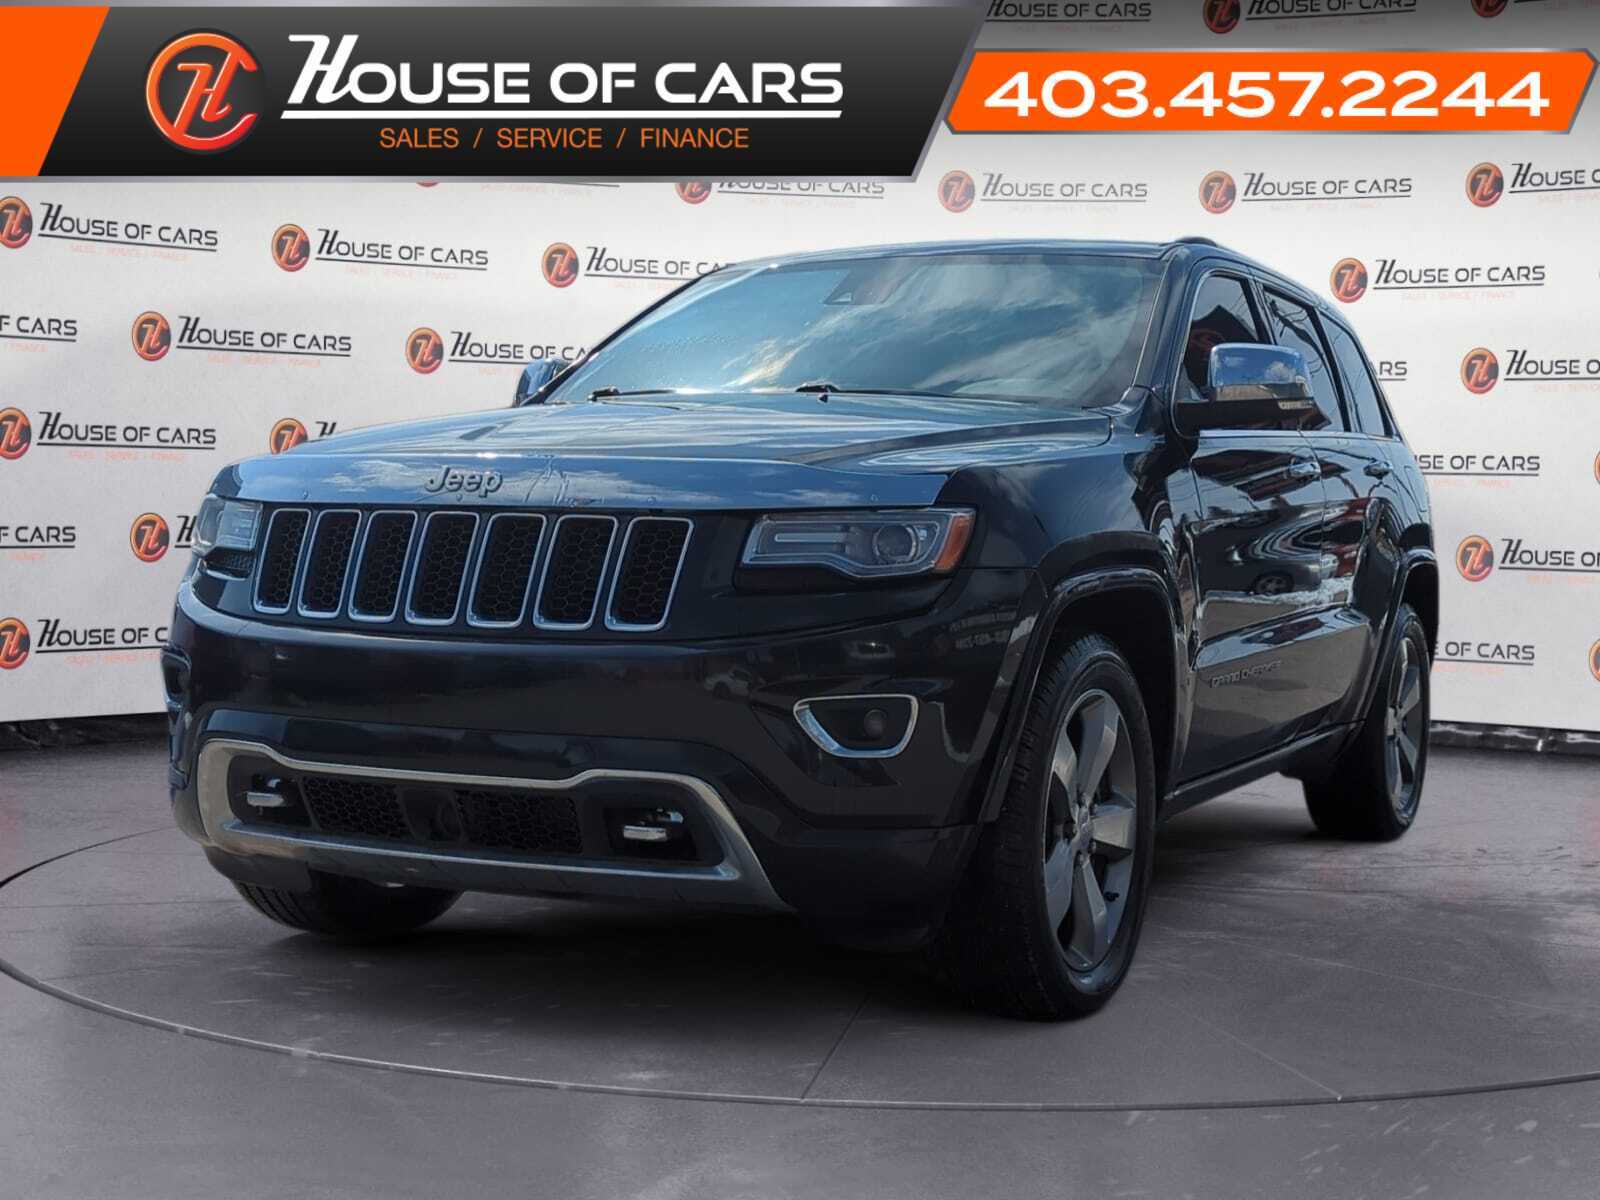 2014 Jeep Grand Cherokee 4WD  Overland Leather Seats Panoramic roof 